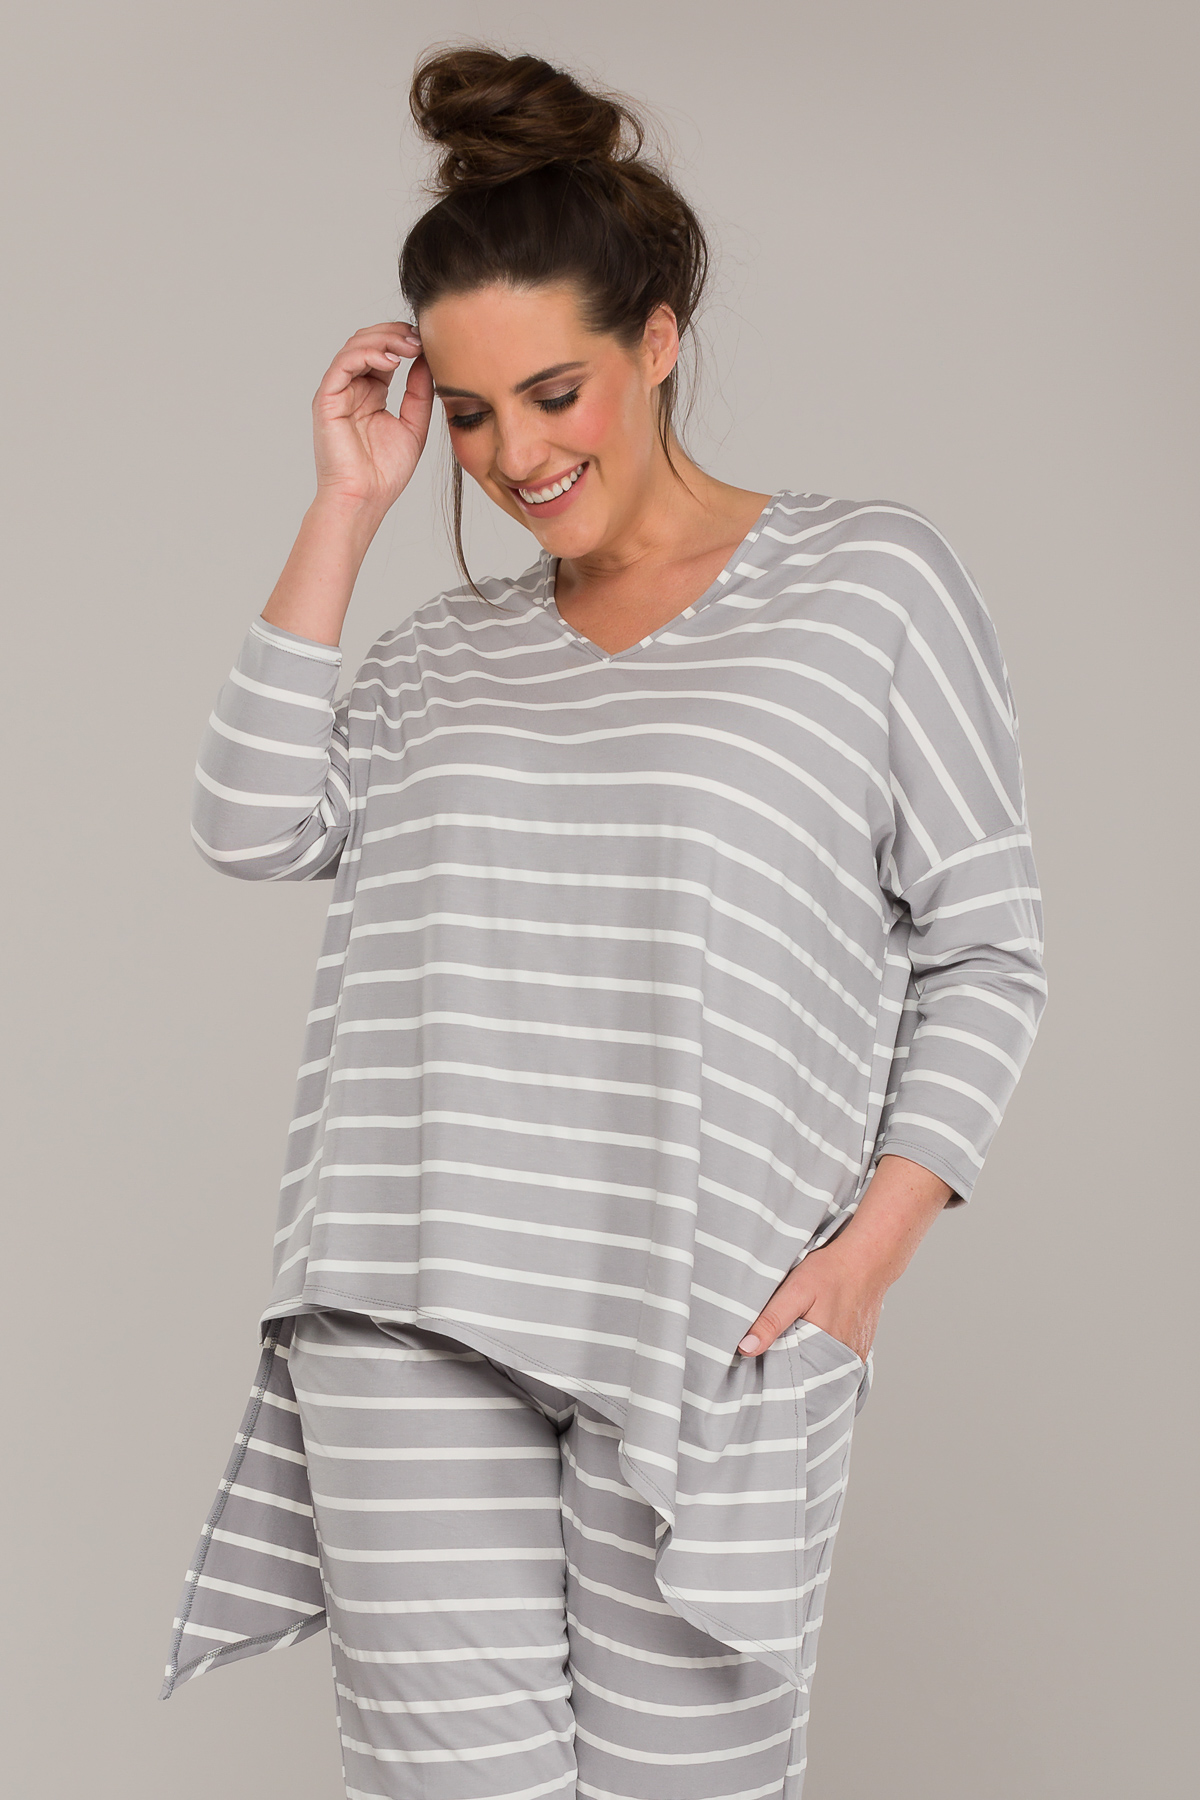 Aneka Double Asymmetric Top White/Grey - The Other Label